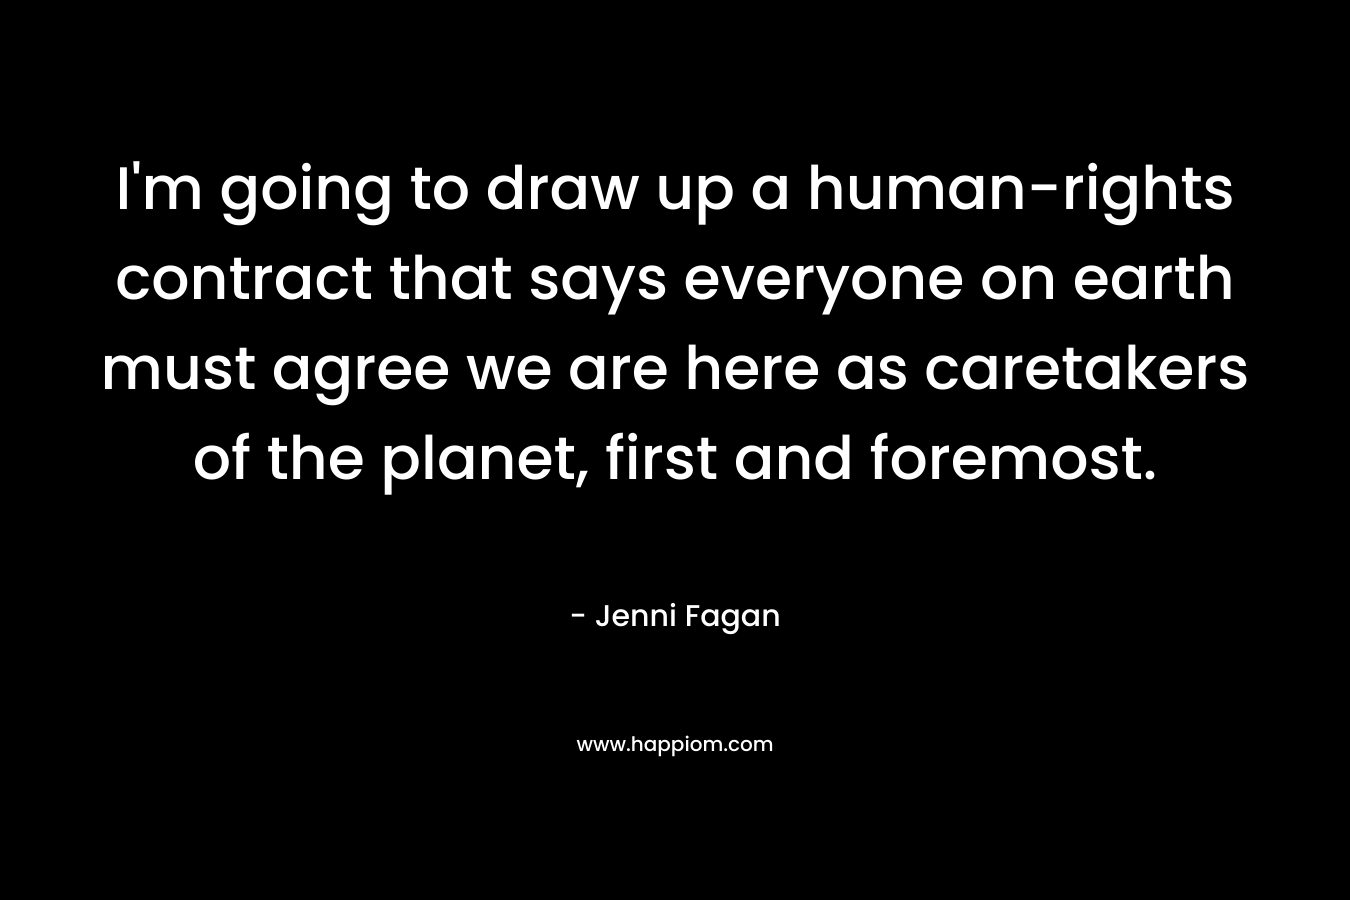 I’m going to draw up a human-rights contract that says everyone on earth must agree we are here as caretakers of the planet, first and foremost. – Jenni Fagan